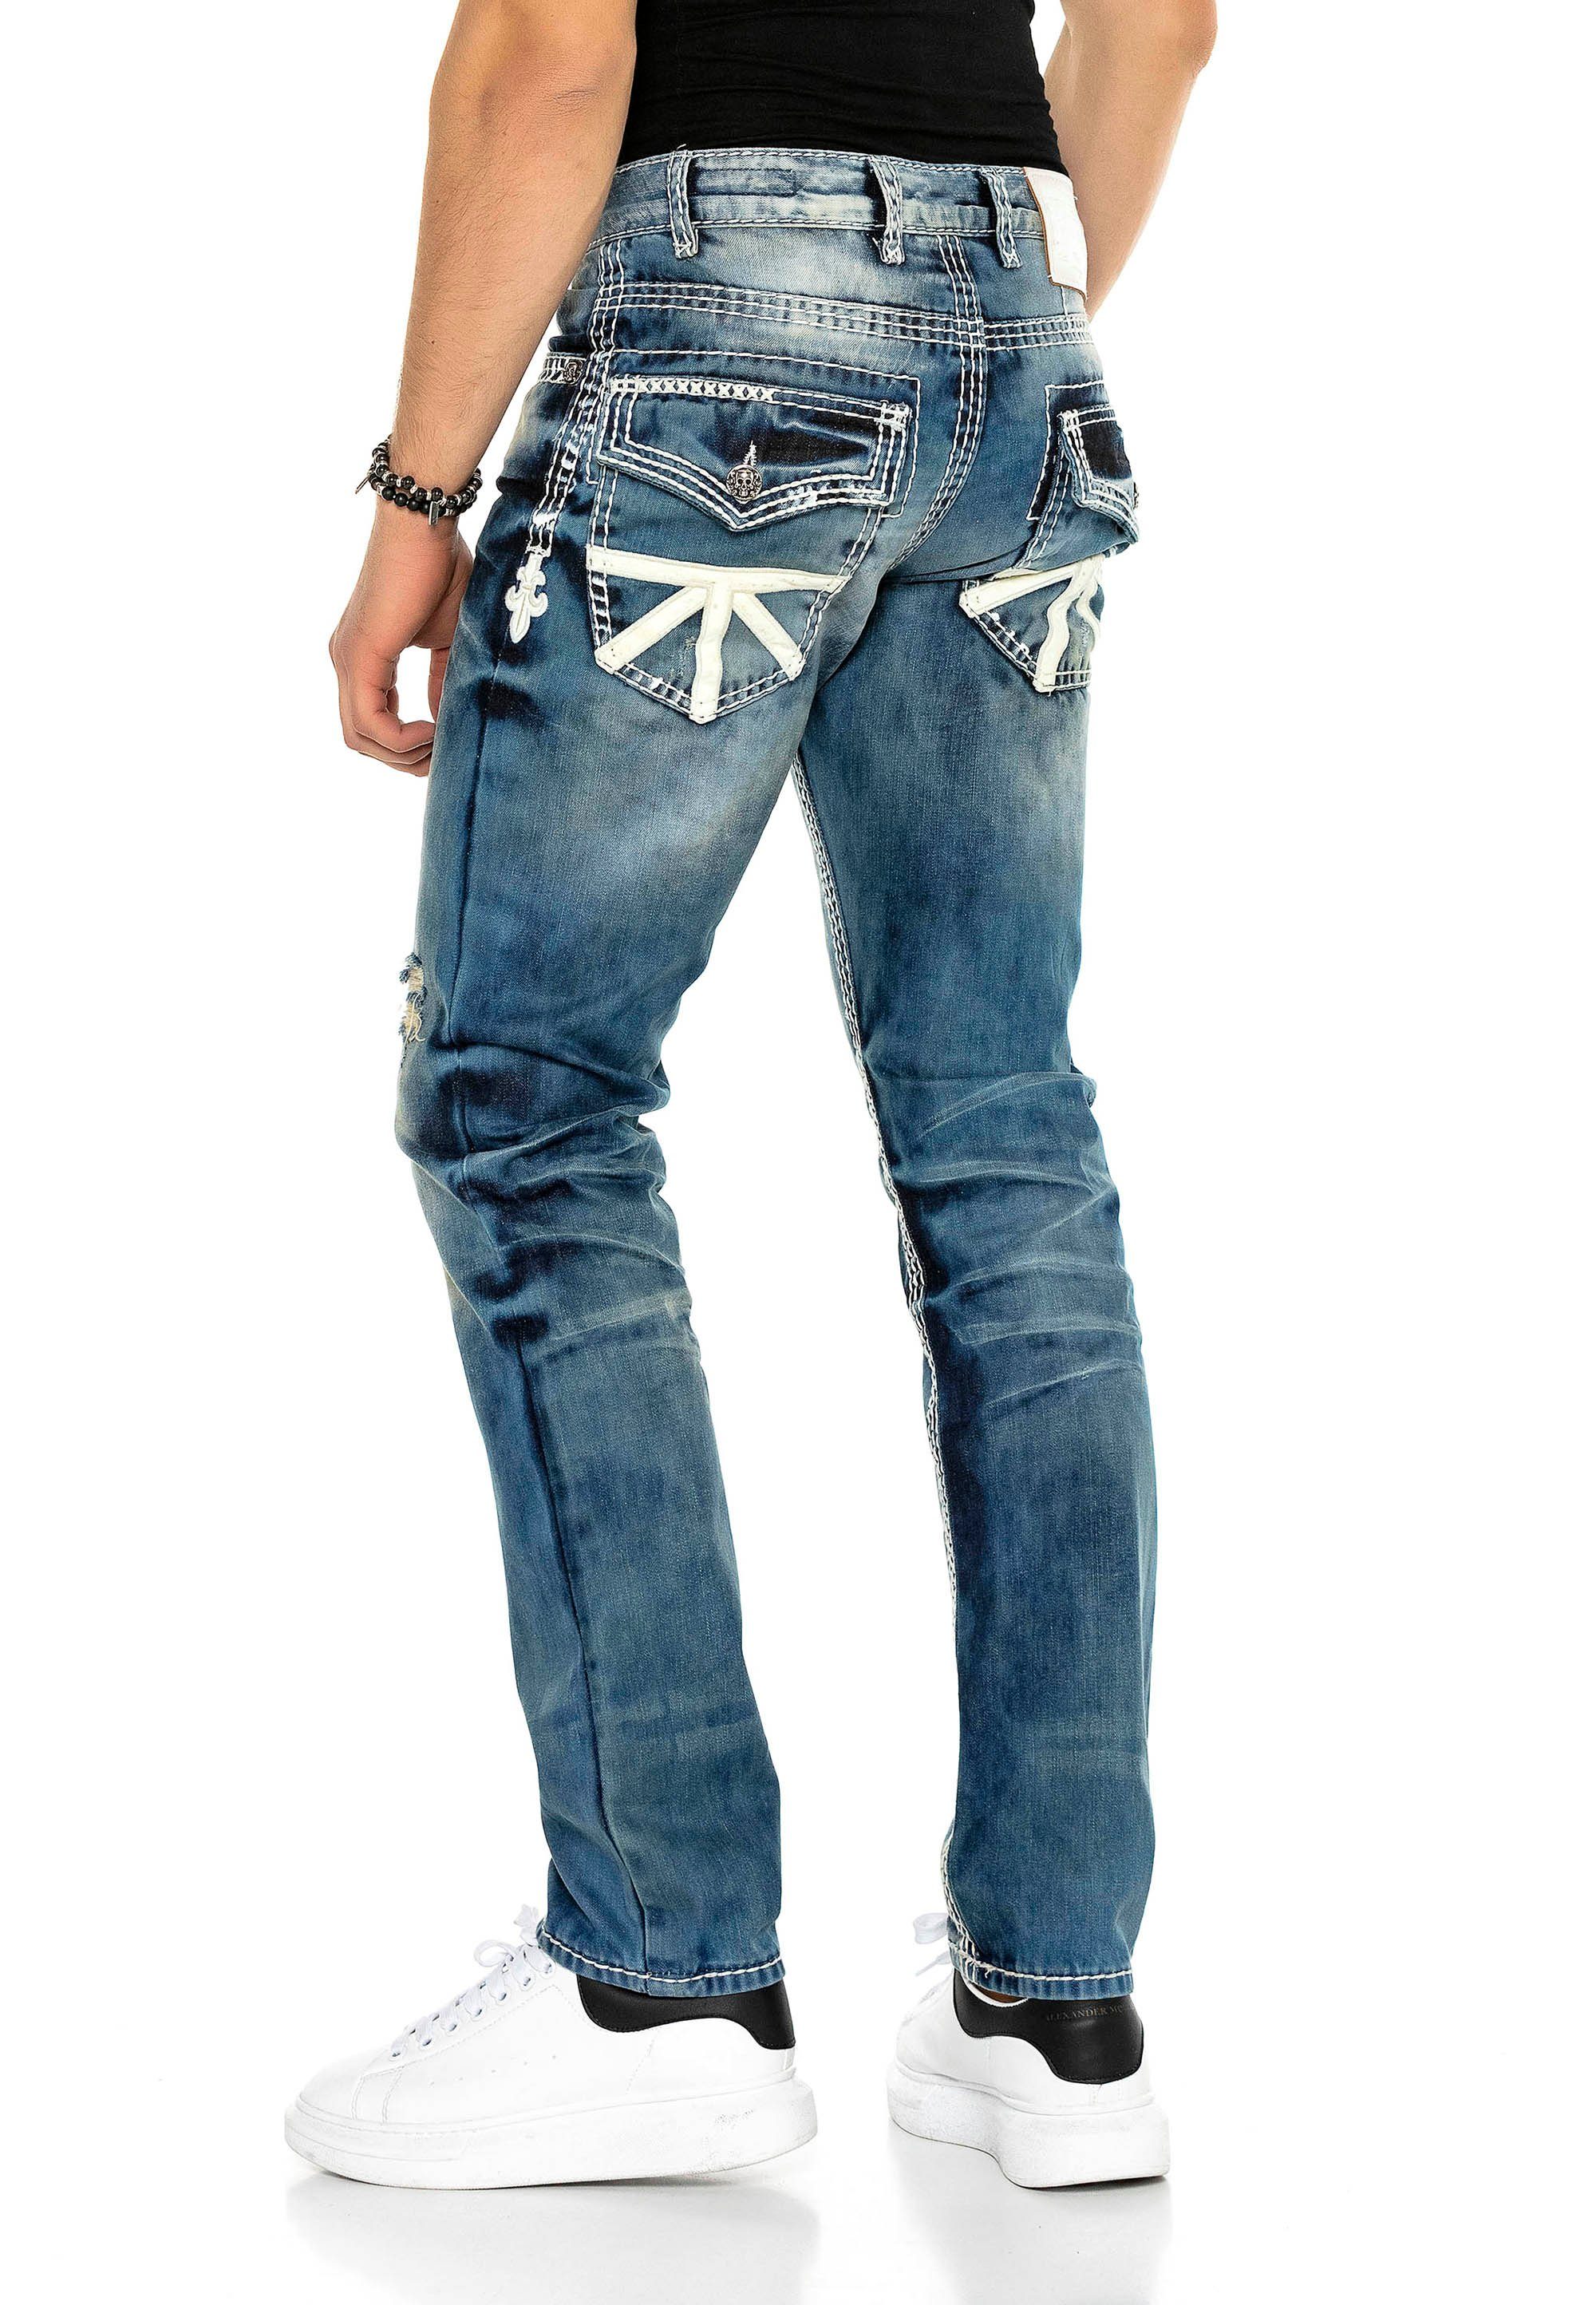 Cipo & Baxx Bequeme Jeans im Fit Used-Look coolen Straight